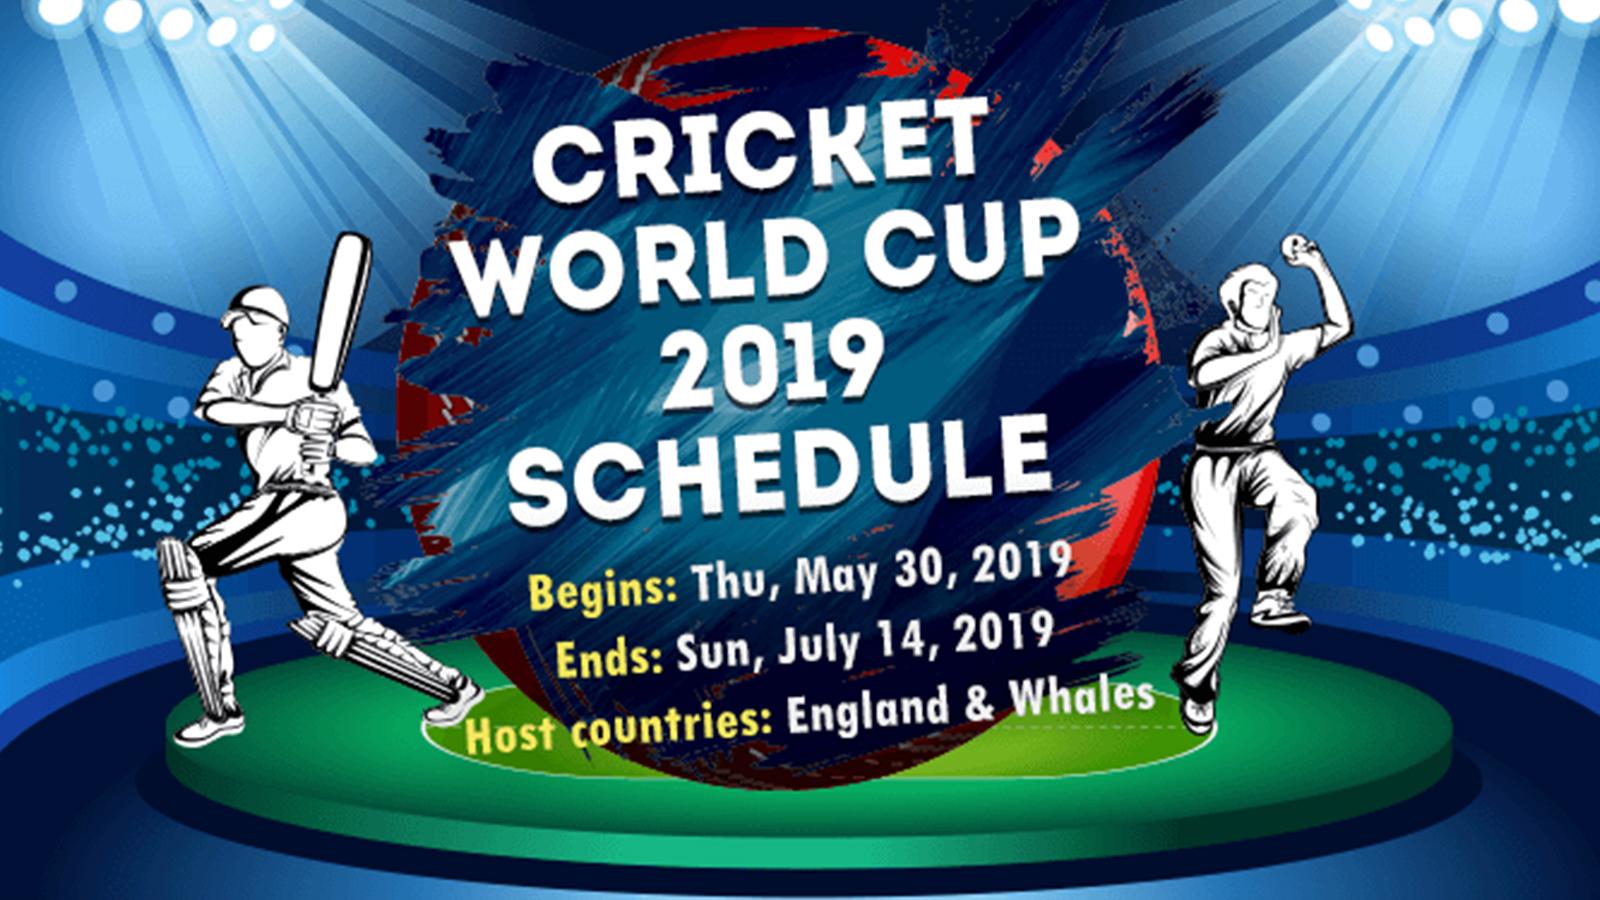 ICC 2019 Cricket World Cup Schedule, Teams, Points Table, Live